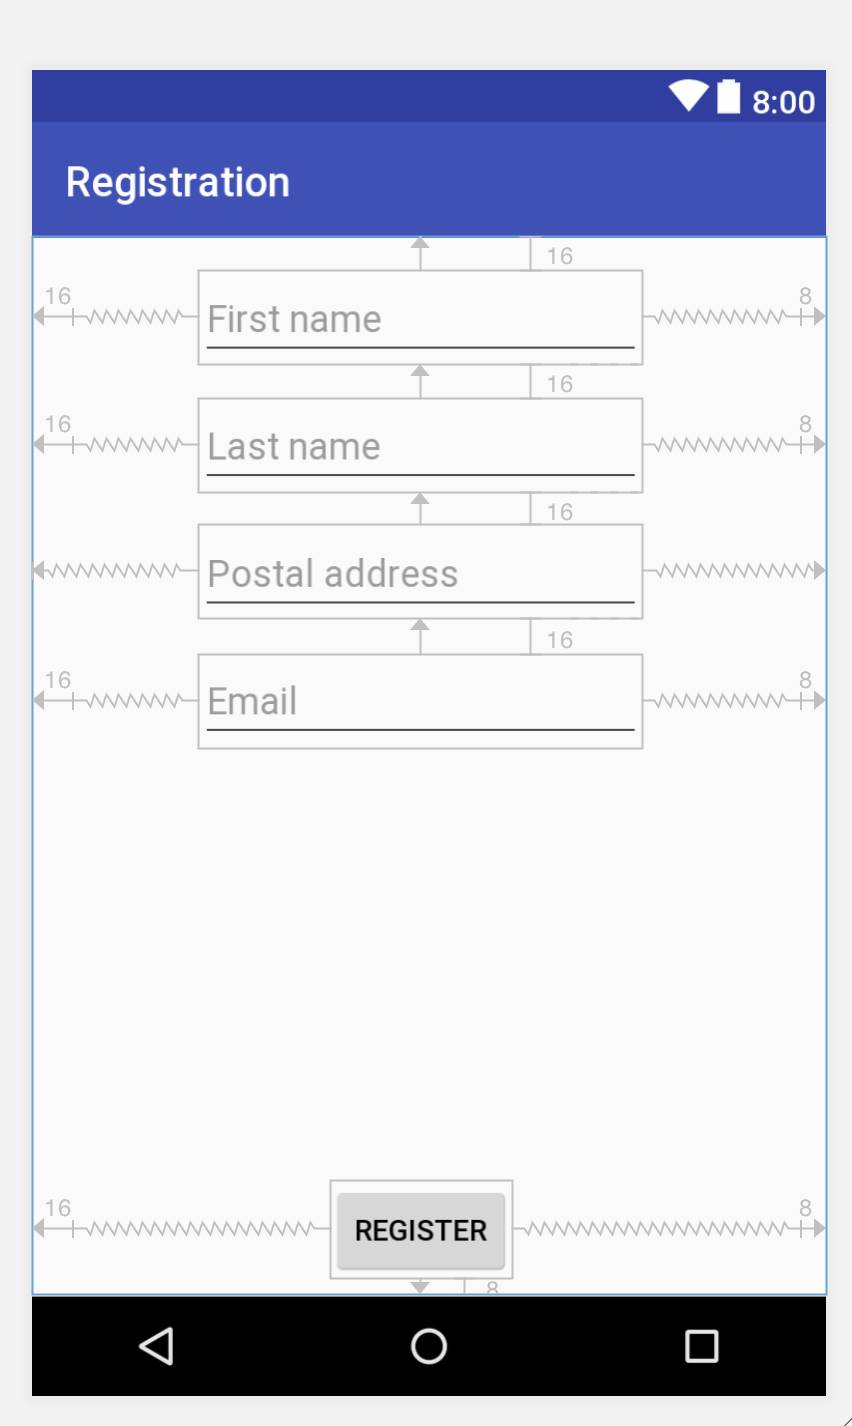 Login and Registration form in Android